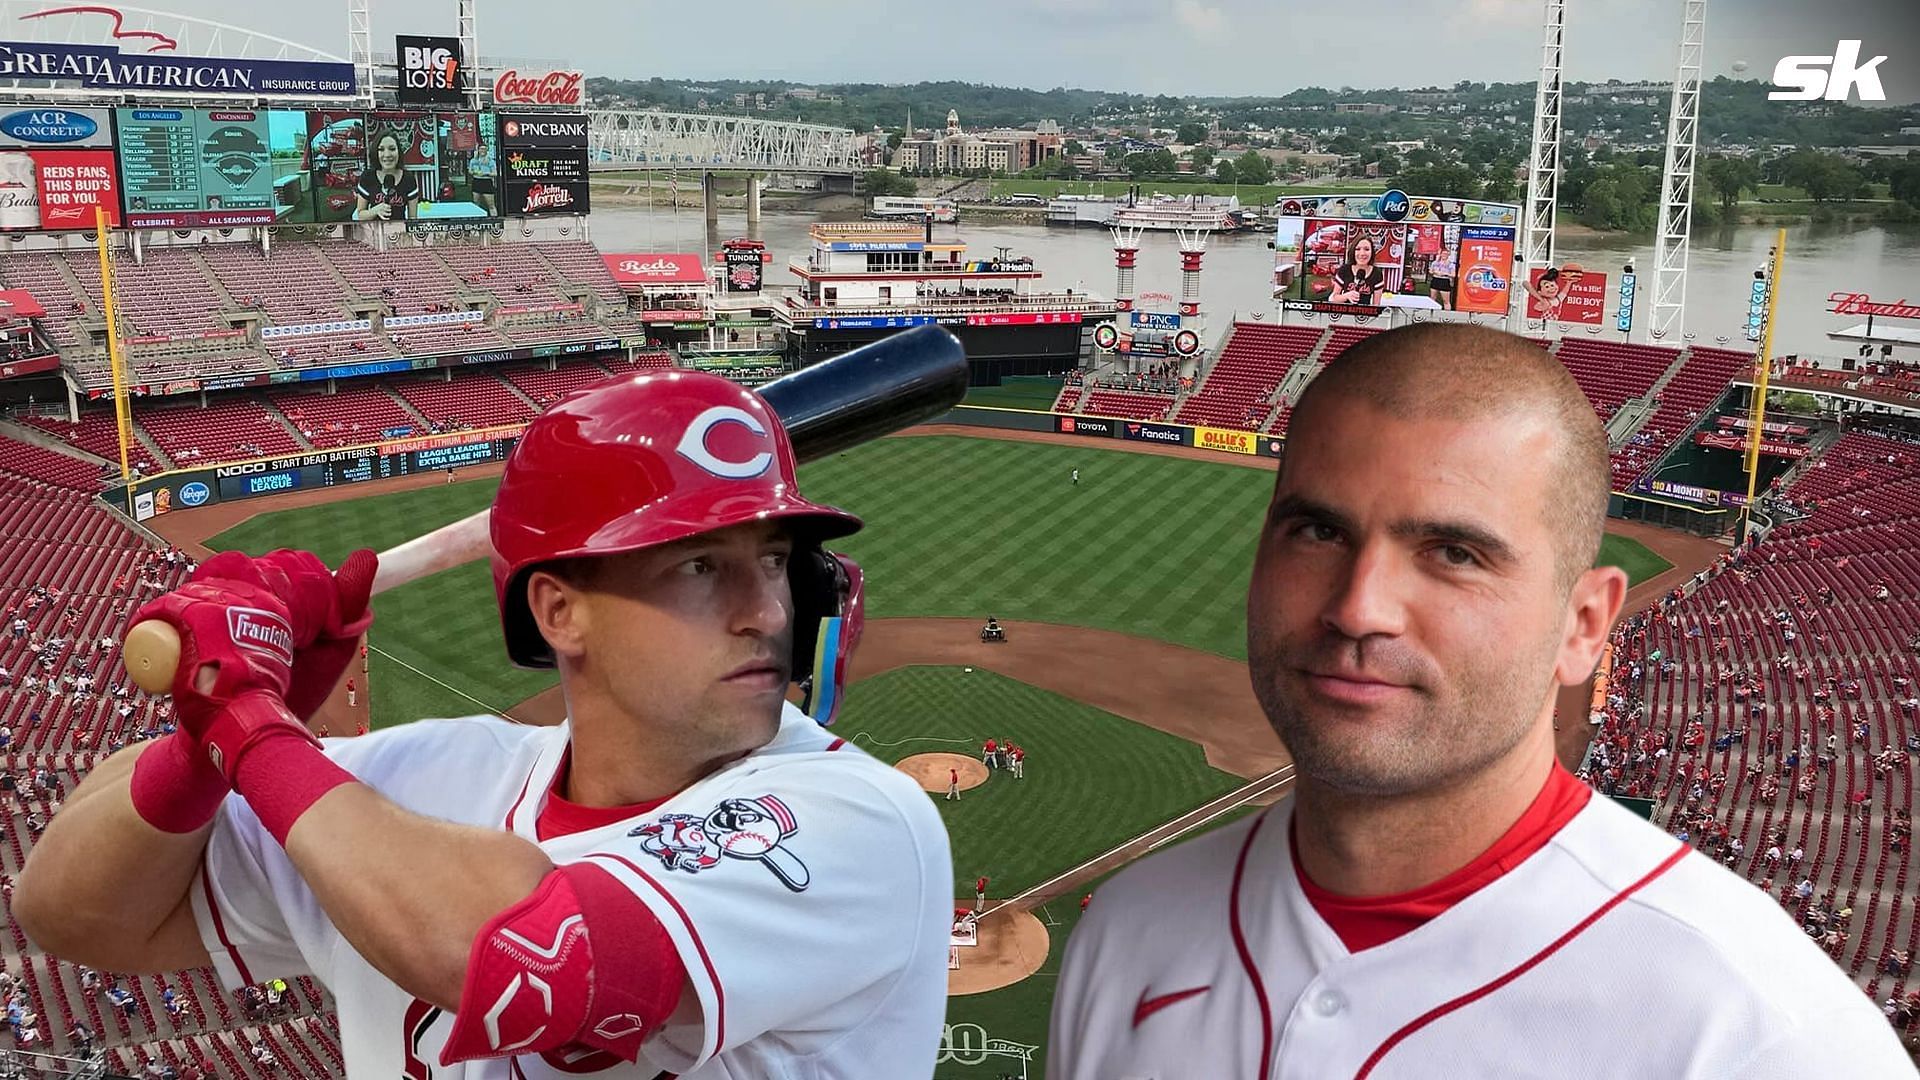 39-year-old Joey Votto runs harder than some rookies says Reds